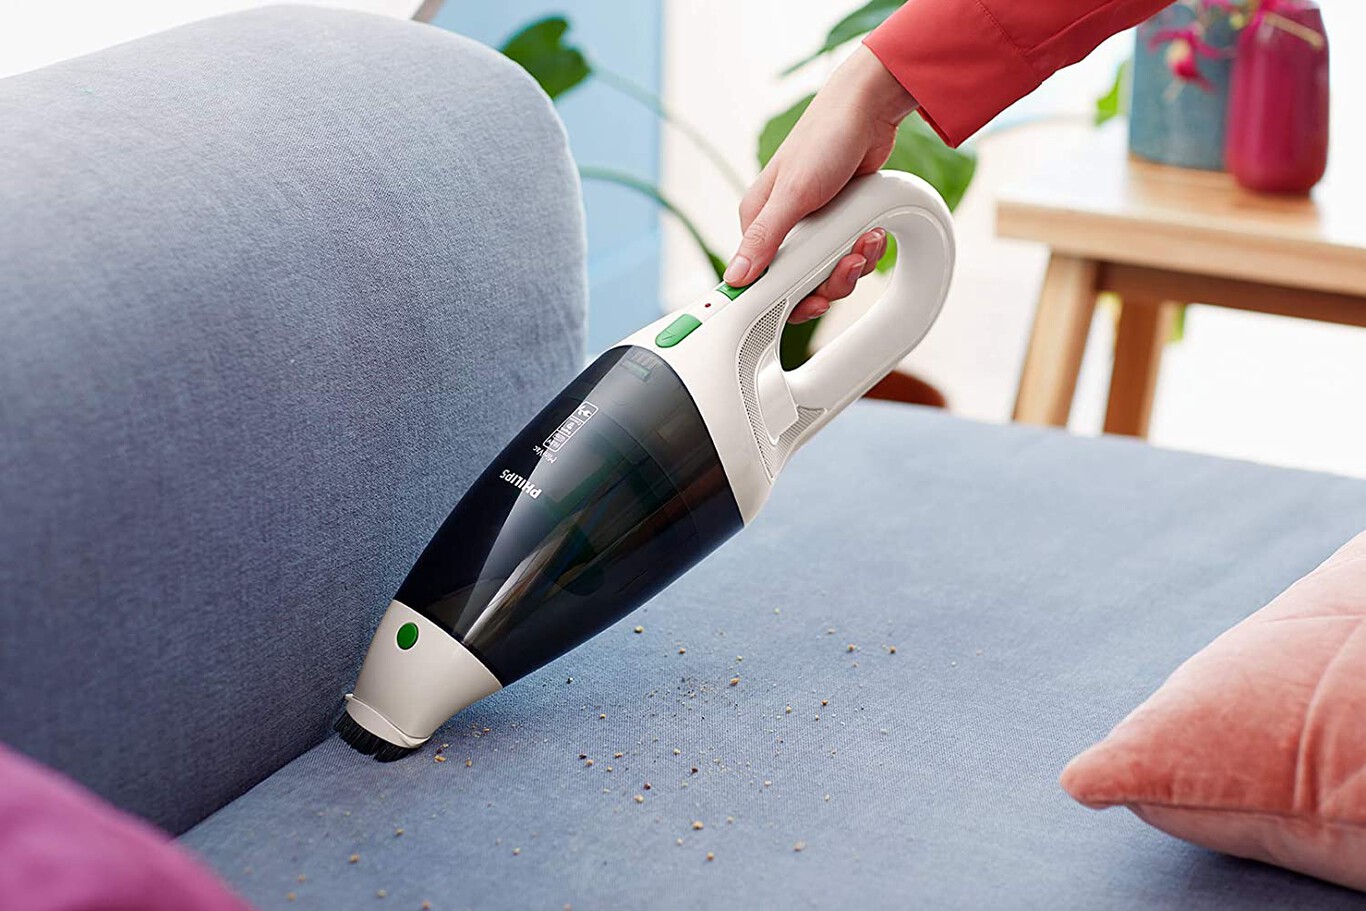 Best handheld vacuum cleaners which one to buy and 7 + 1 recommended models from just over 30 euros